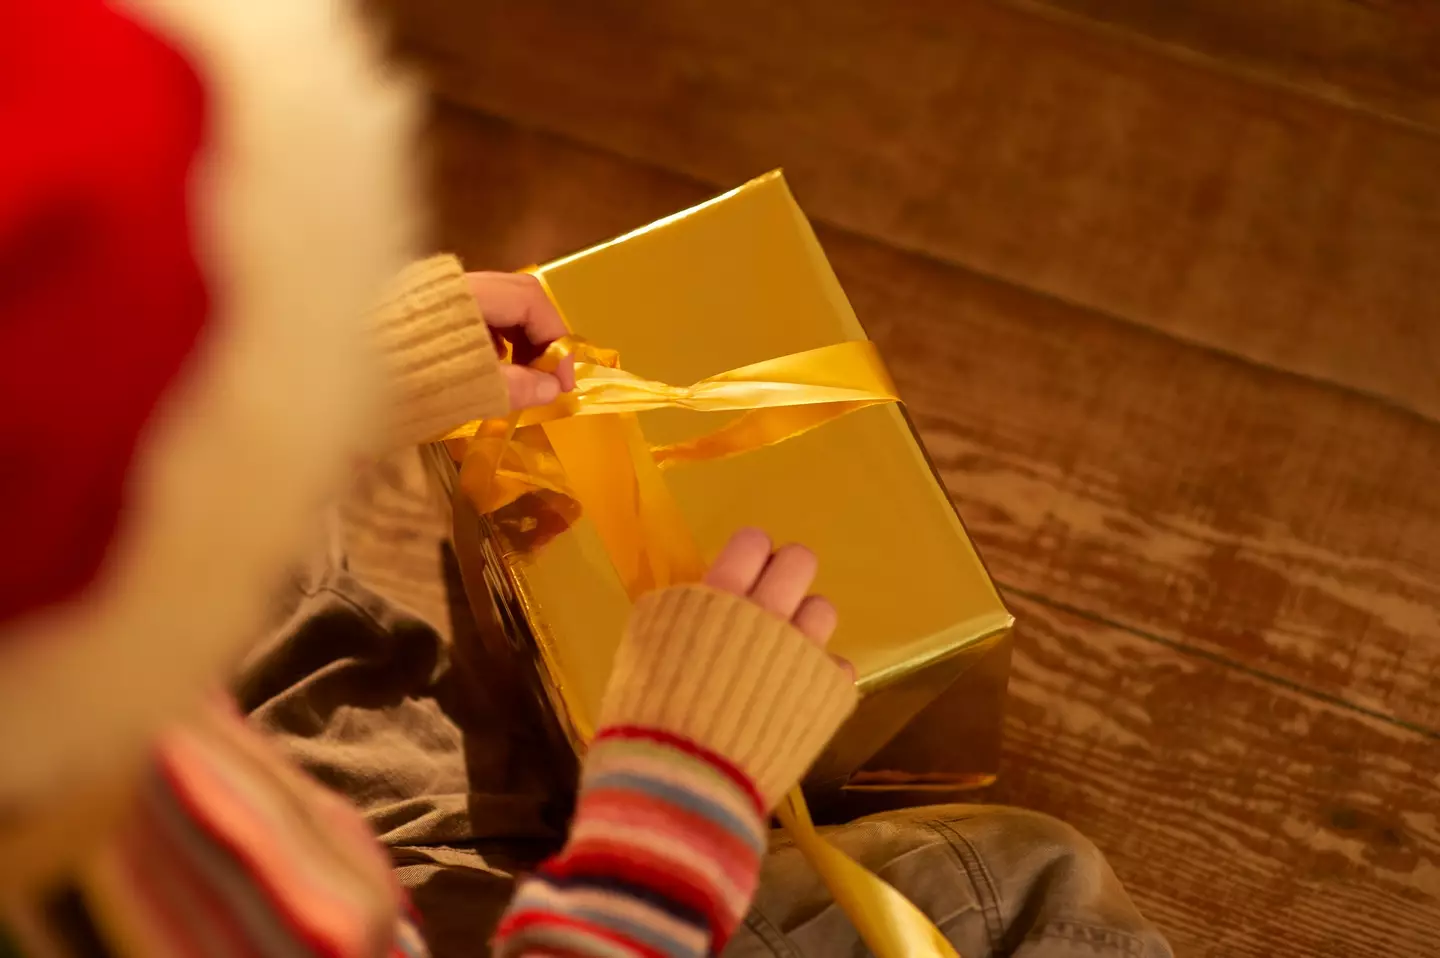 Some parents feel going OTT on Christmas presents isn't necessary.